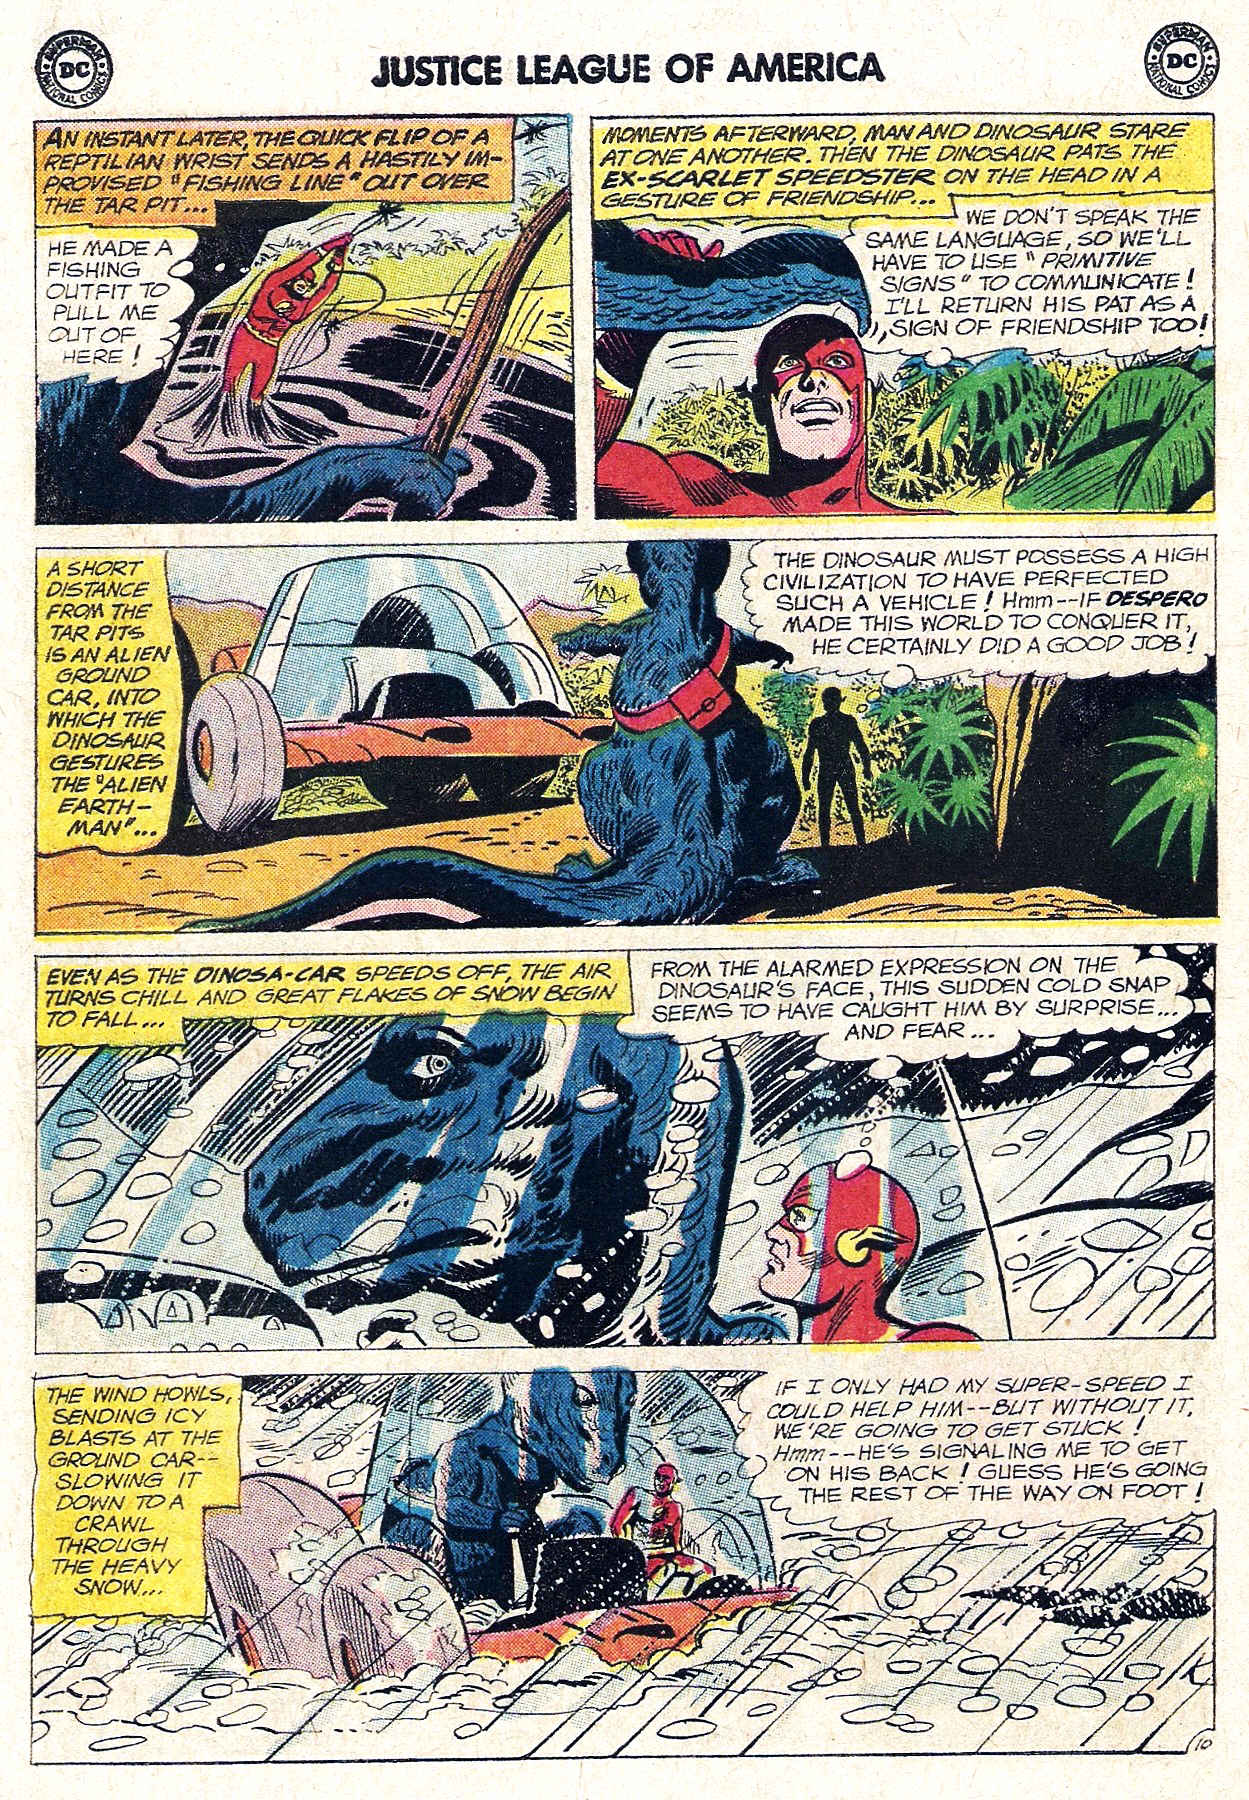 Justice League of America (1960) 26 Page 13